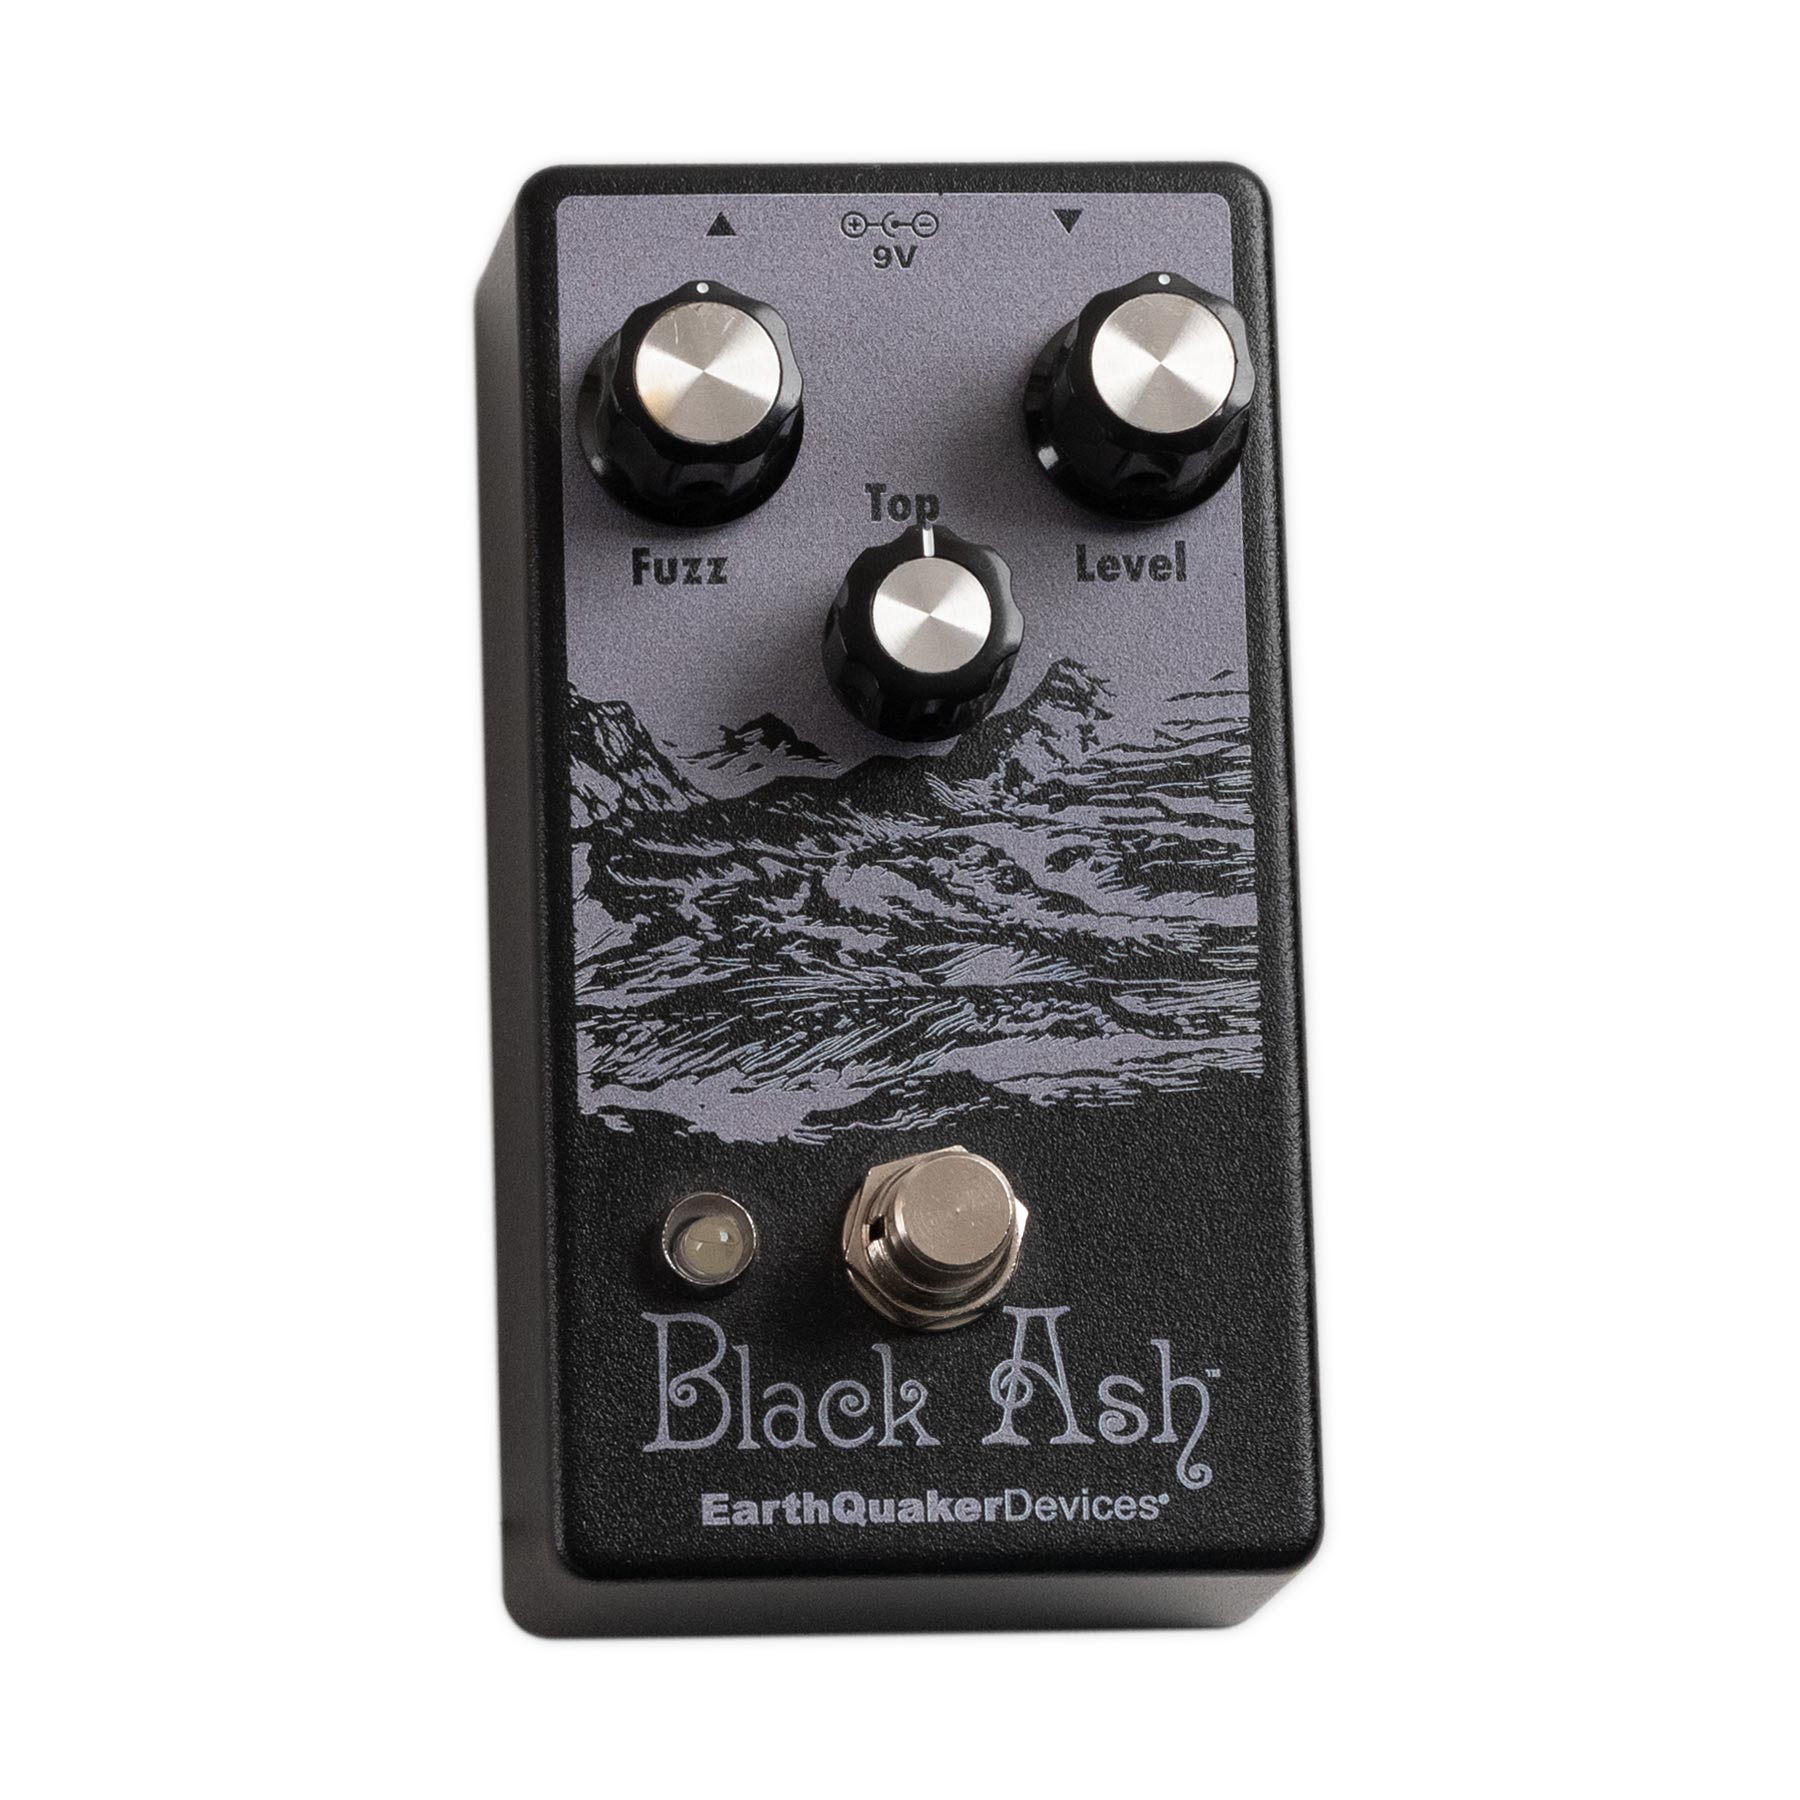 USED EARTHQUAKER DEVICES BLACK ASH FUZZ WITH BOX